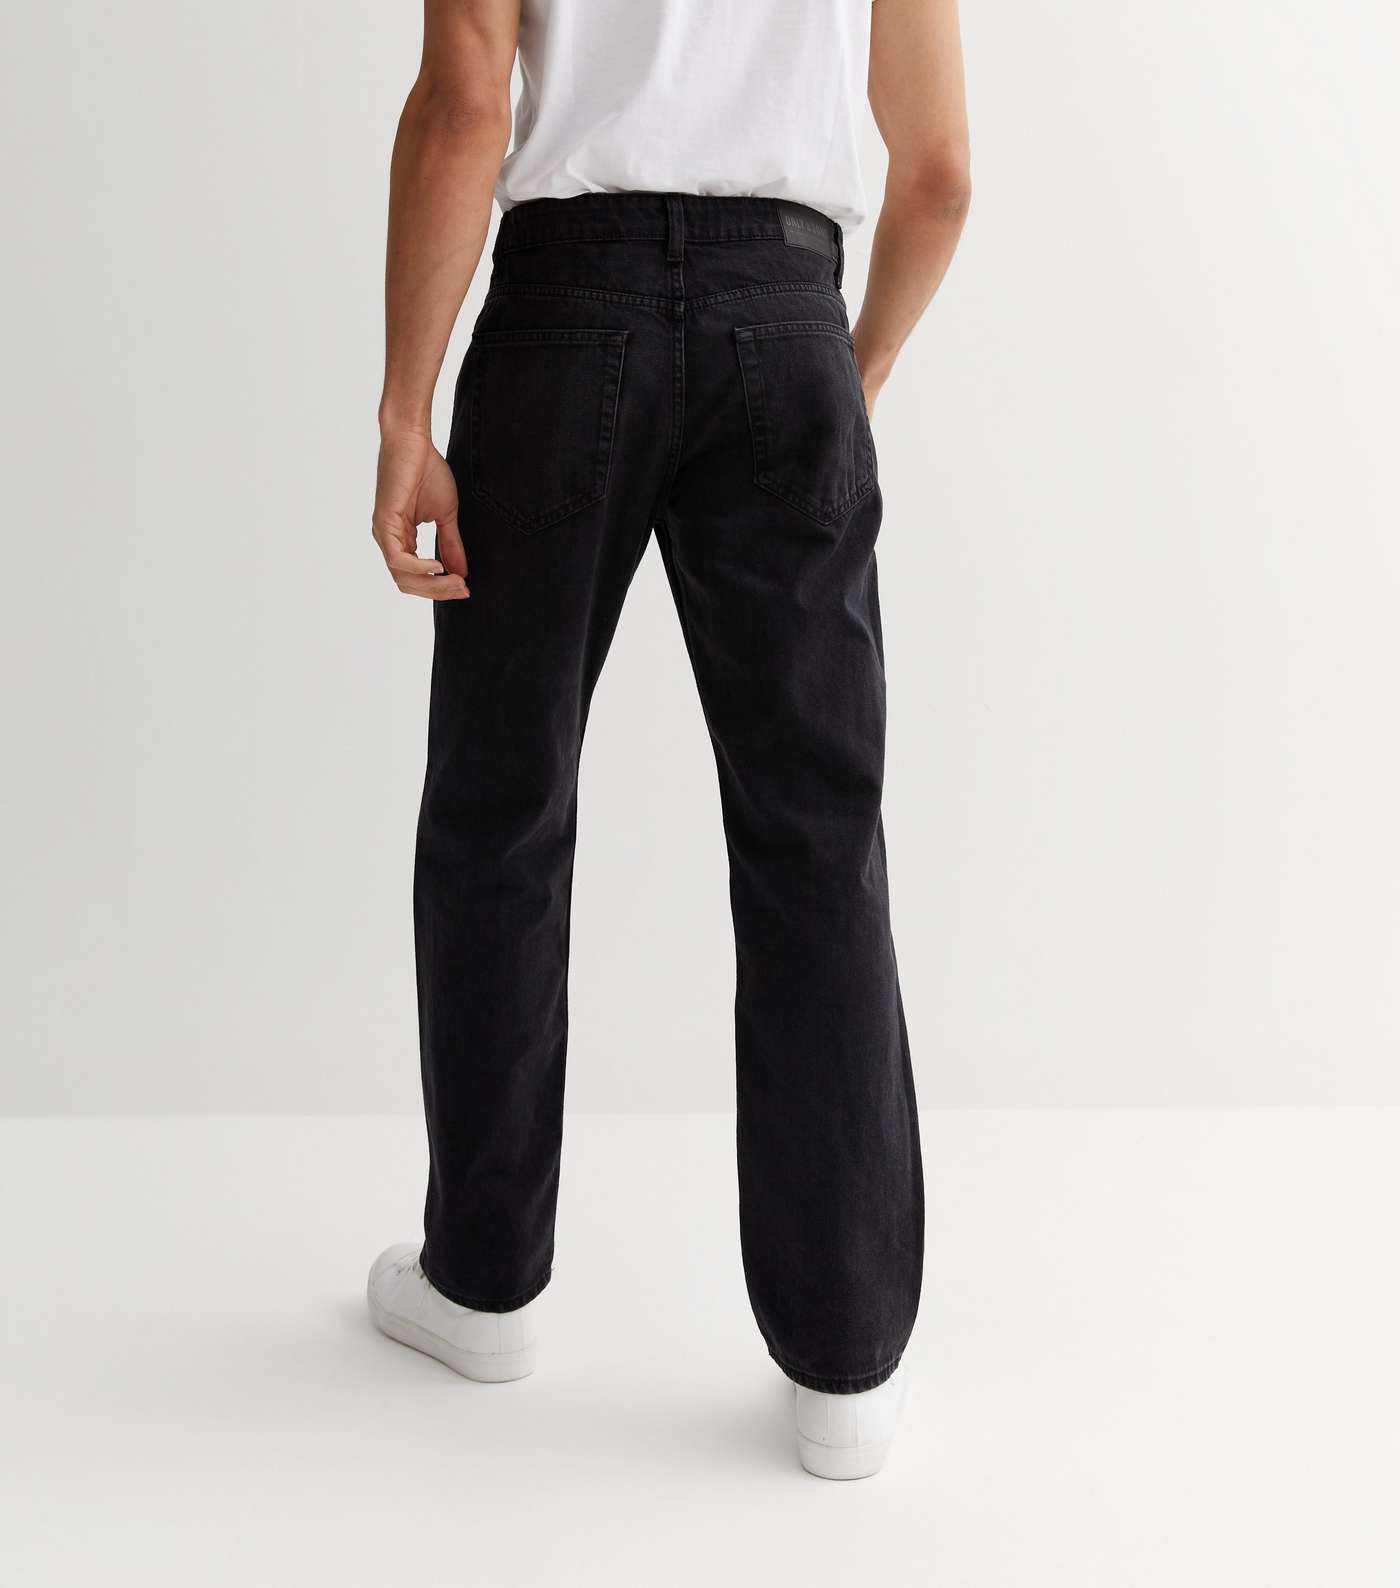 Only & Sons Black Baggy Fit Wide Leg Jeans Image 4